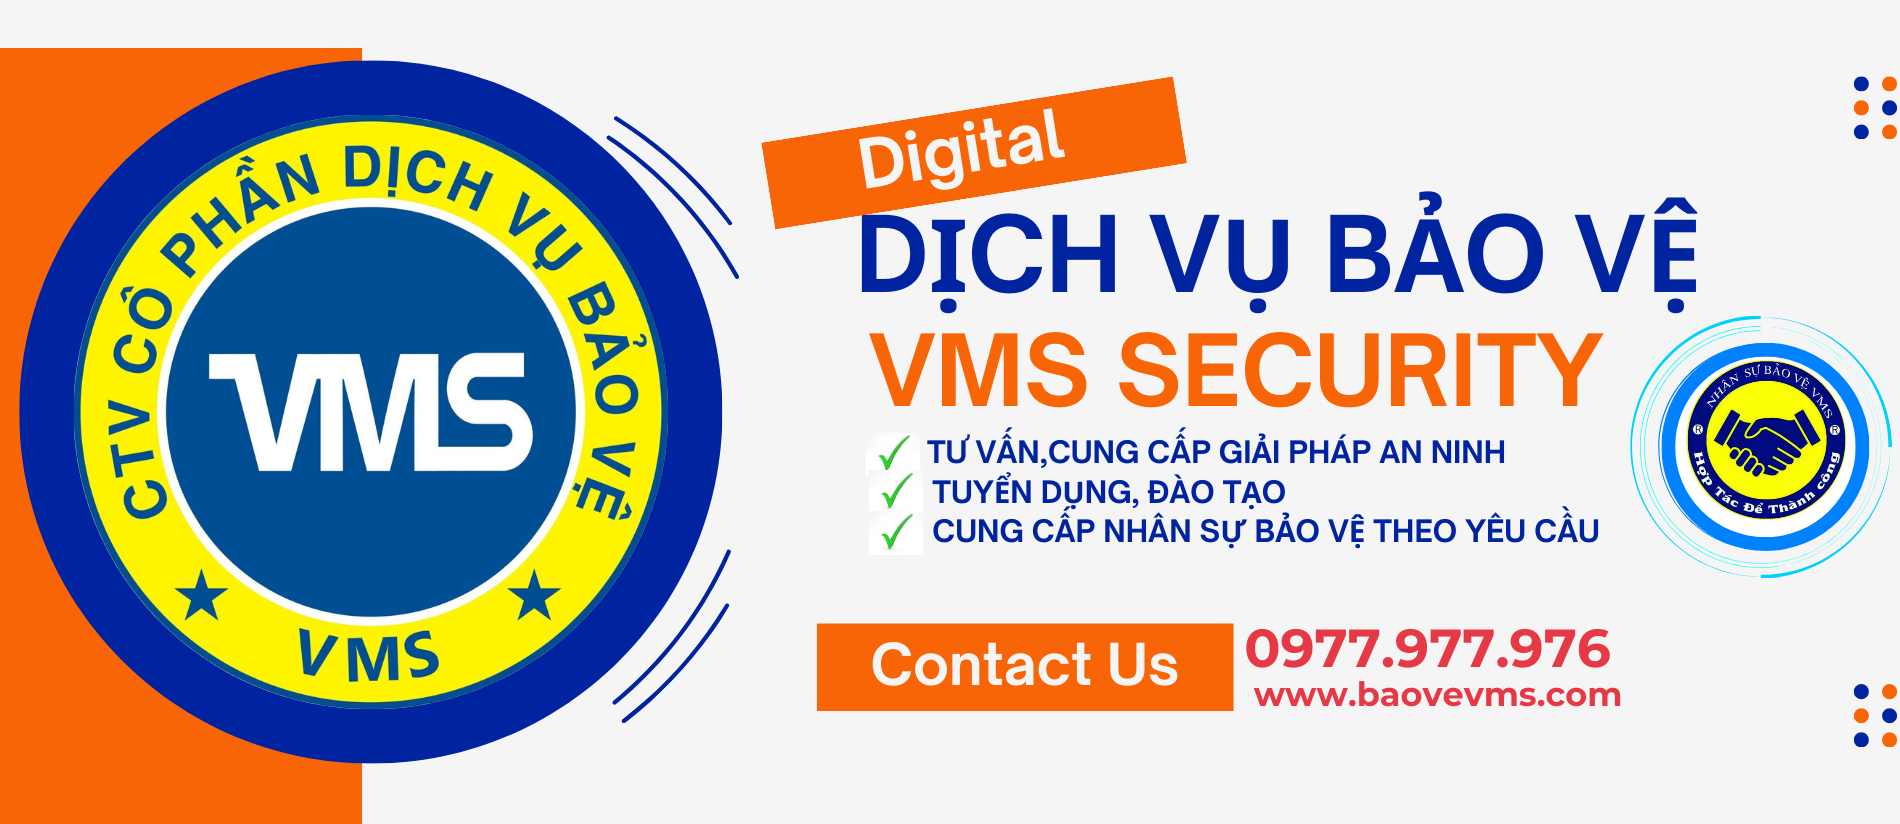 vms security (1900 x 824 px)_-29-05-2024-12-53-03.png